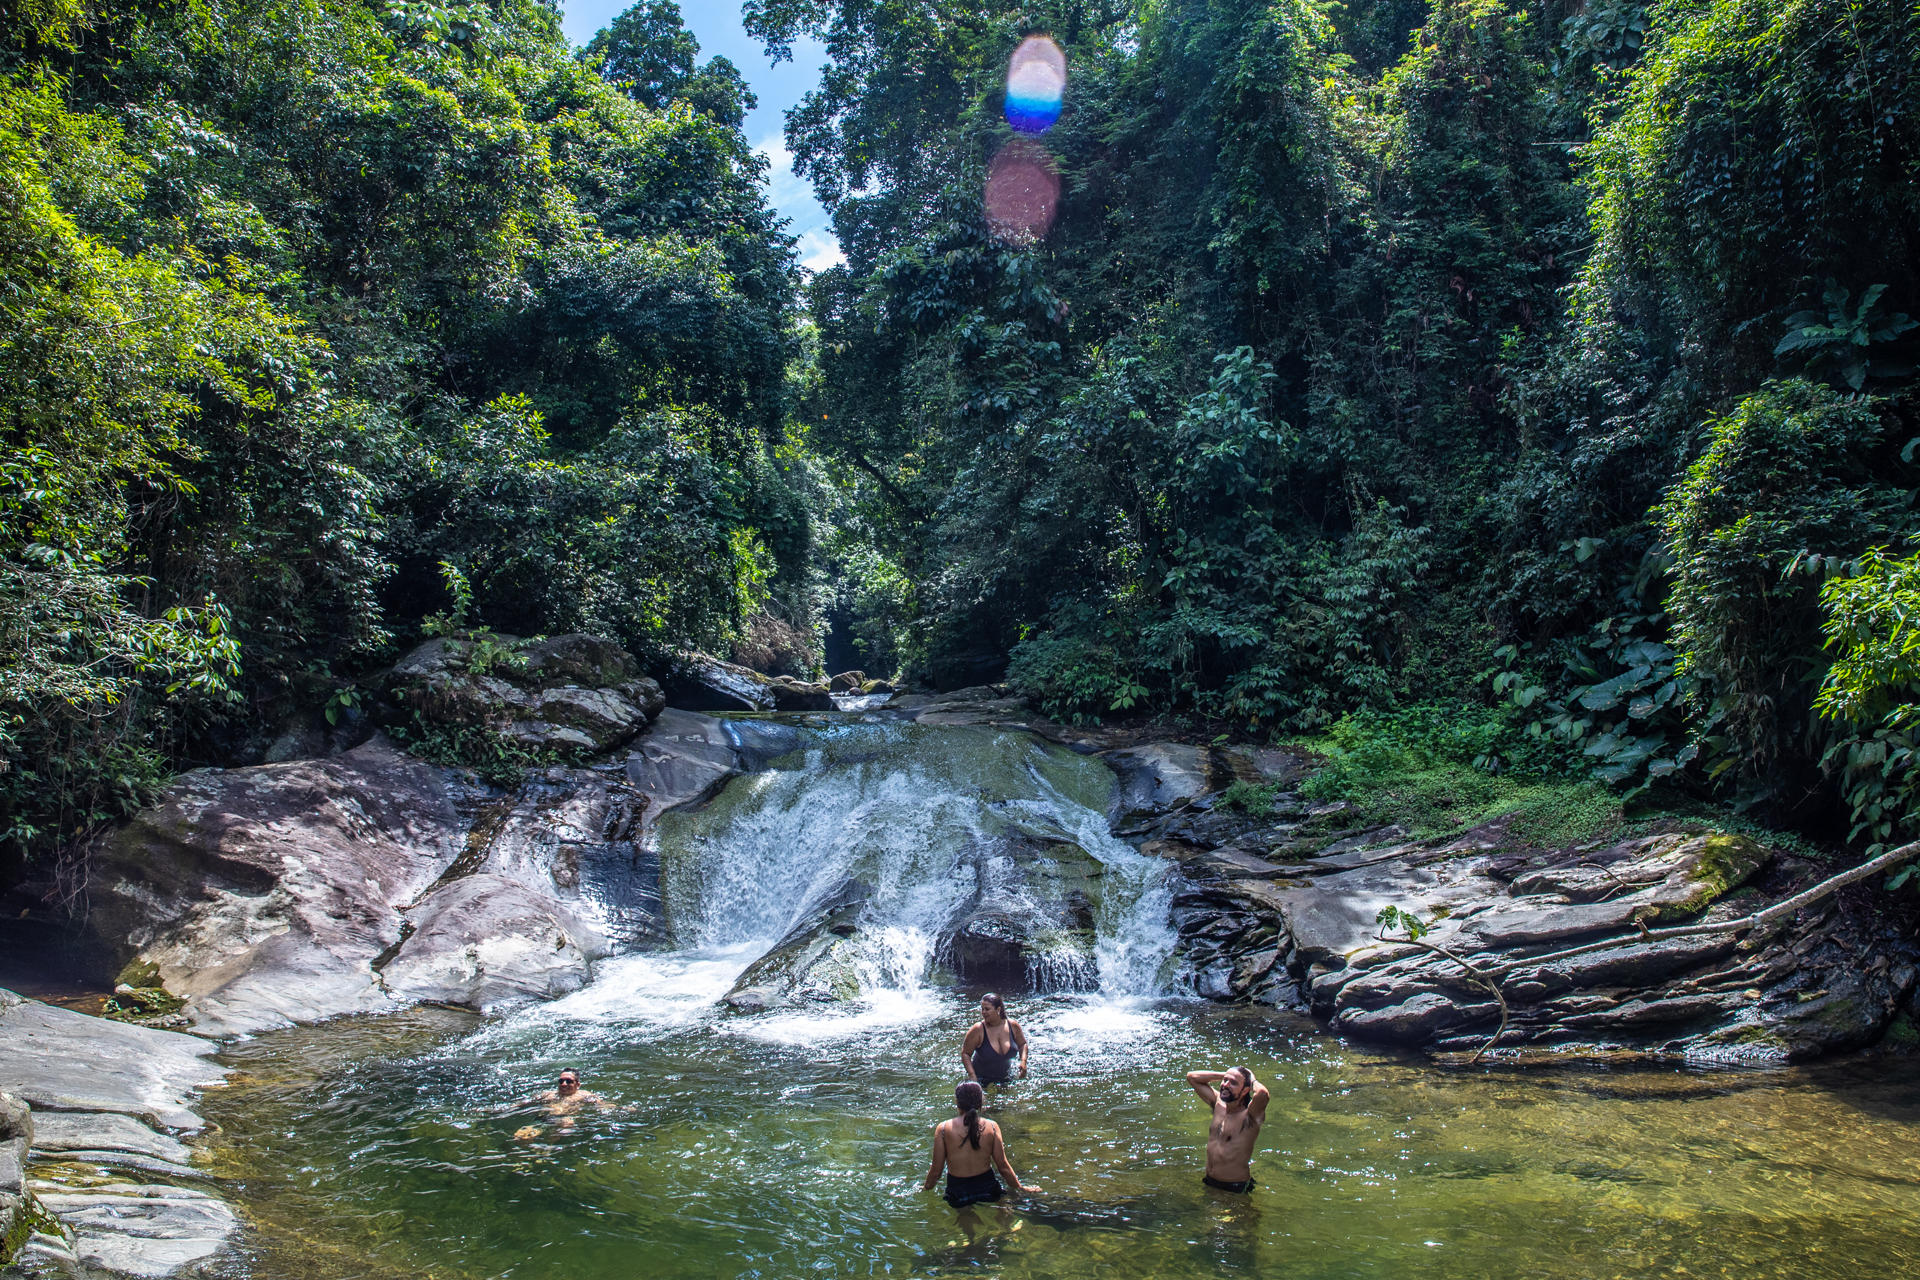 Tourists enjoys themselves in a waterfall in Guapimirim, Brazil, on 29 March 2023. EFE/Andre Coelho